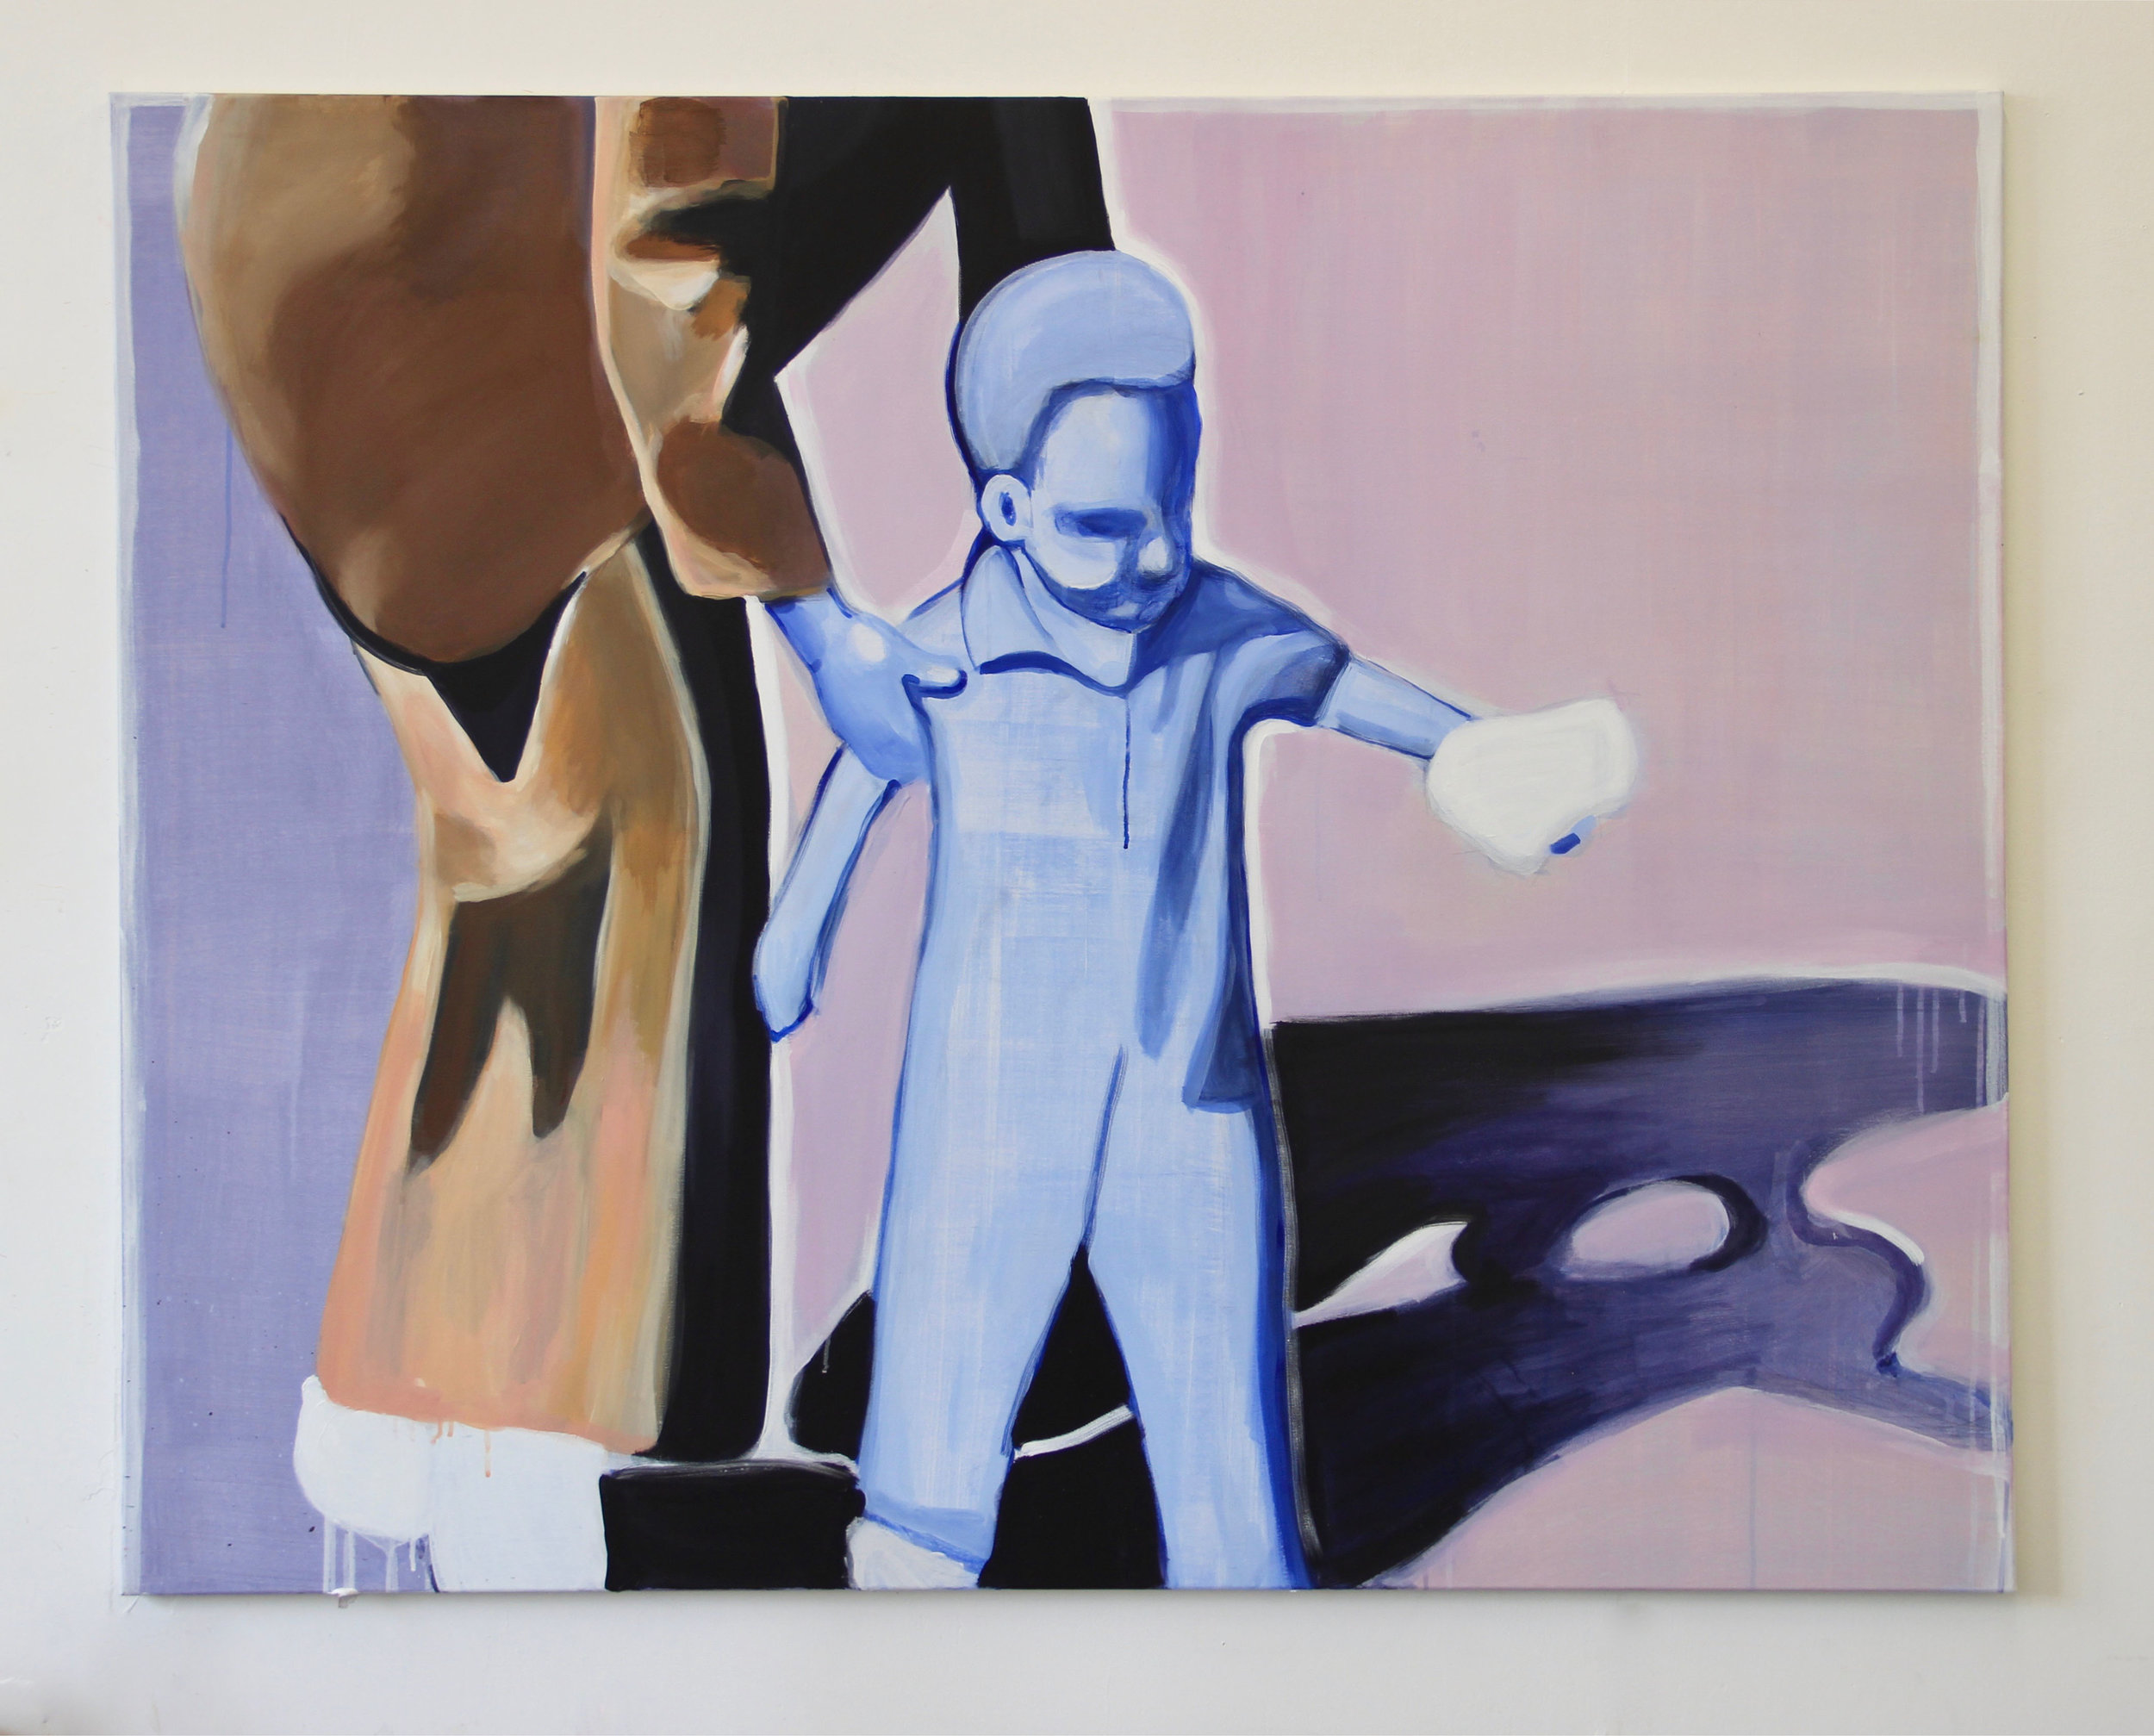   Man and child , 2018 Acrylic on canvas 48 x 60 inches 